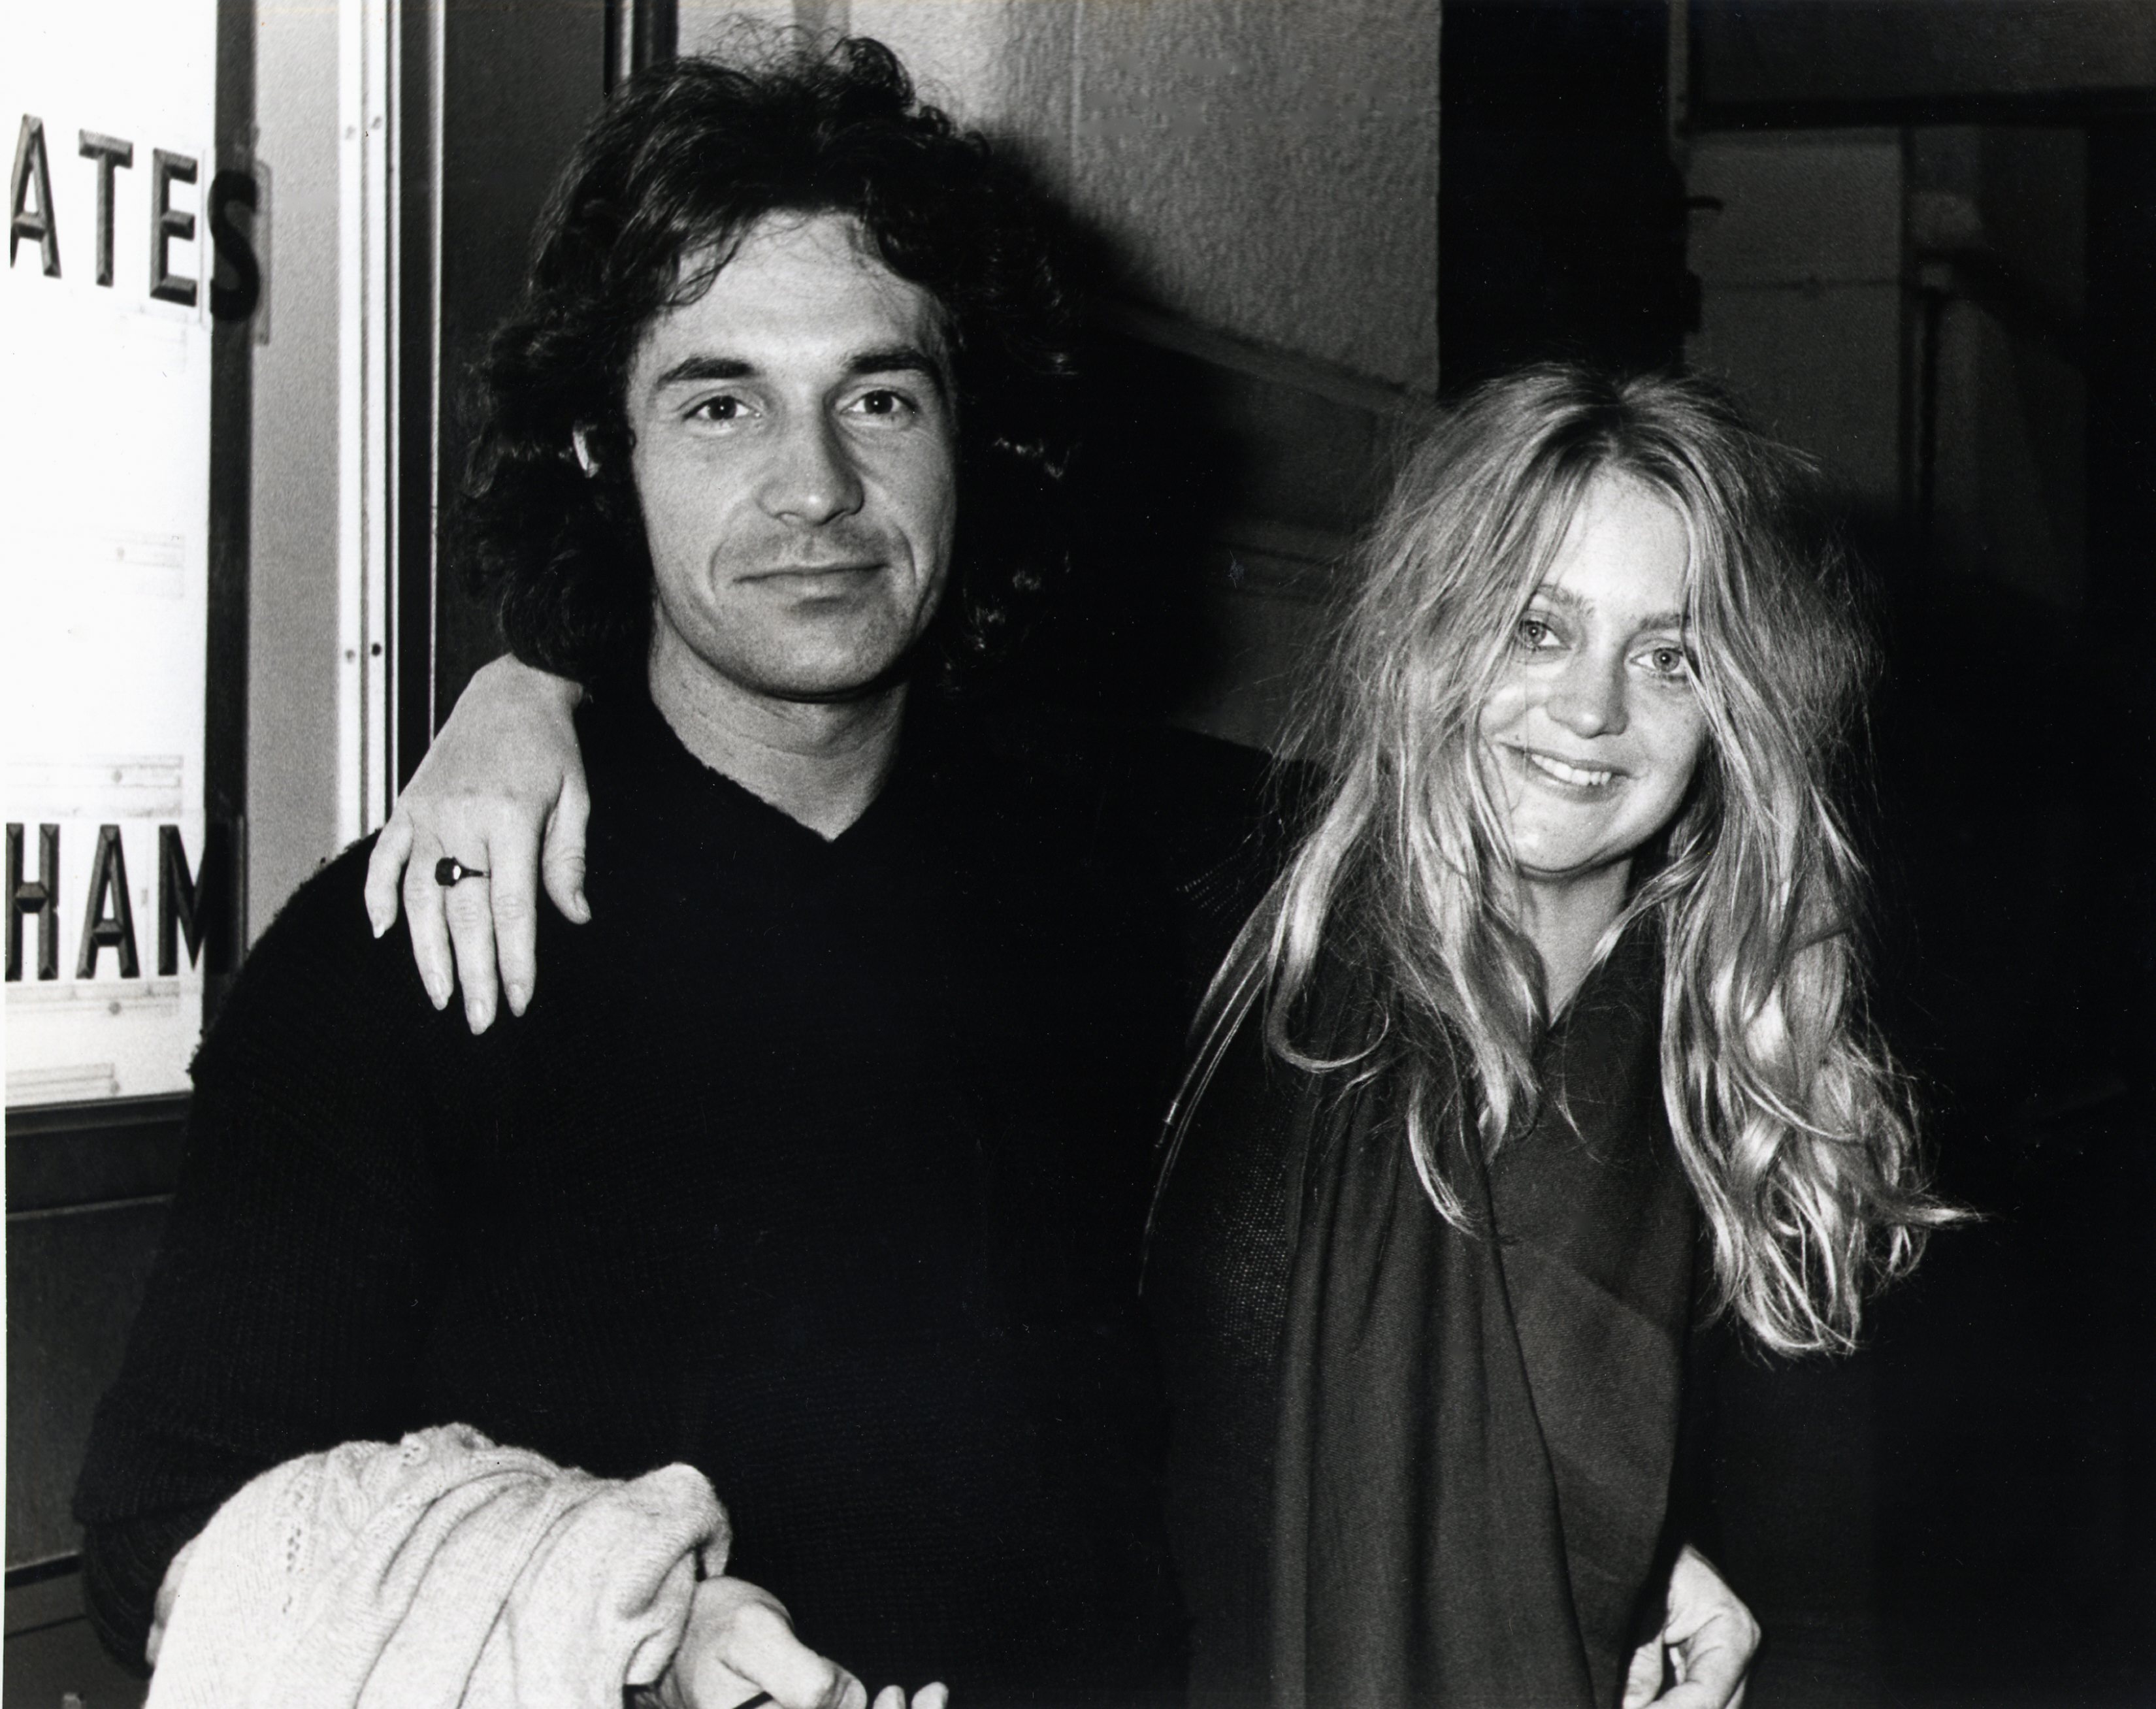 Monochrome photo of Bill Hudson and Goldie Hawn, dated November 20, 1976. | Source: Getty Images